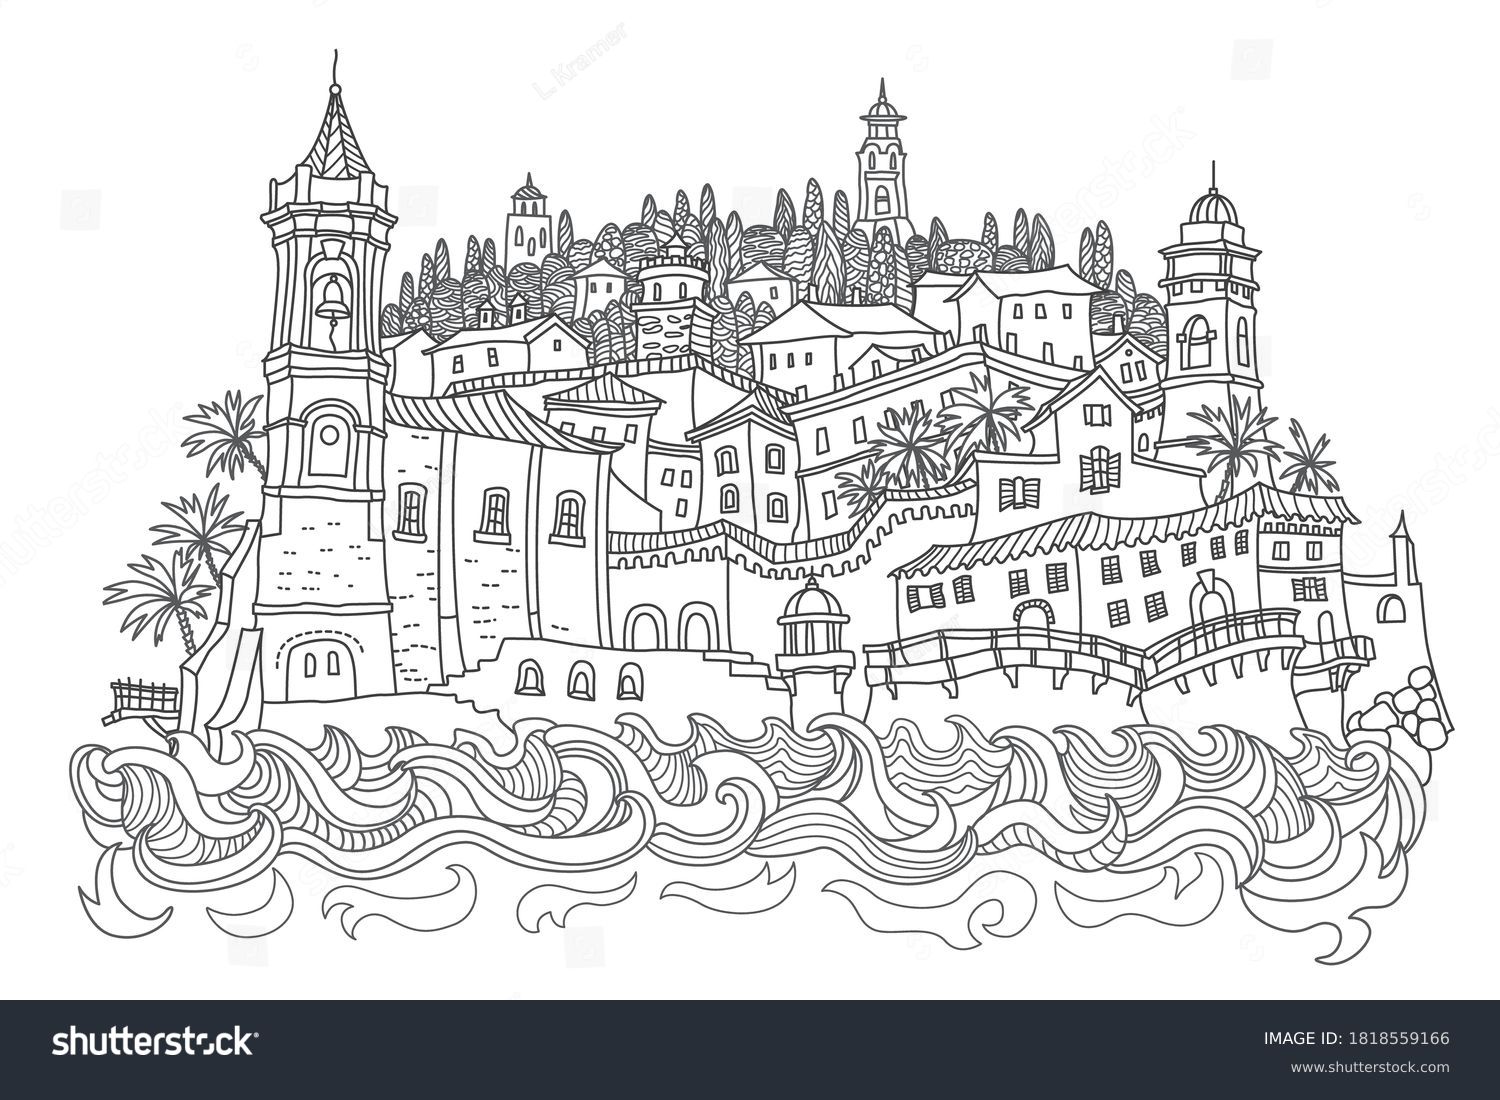 Thousand castle colouring pages royalty